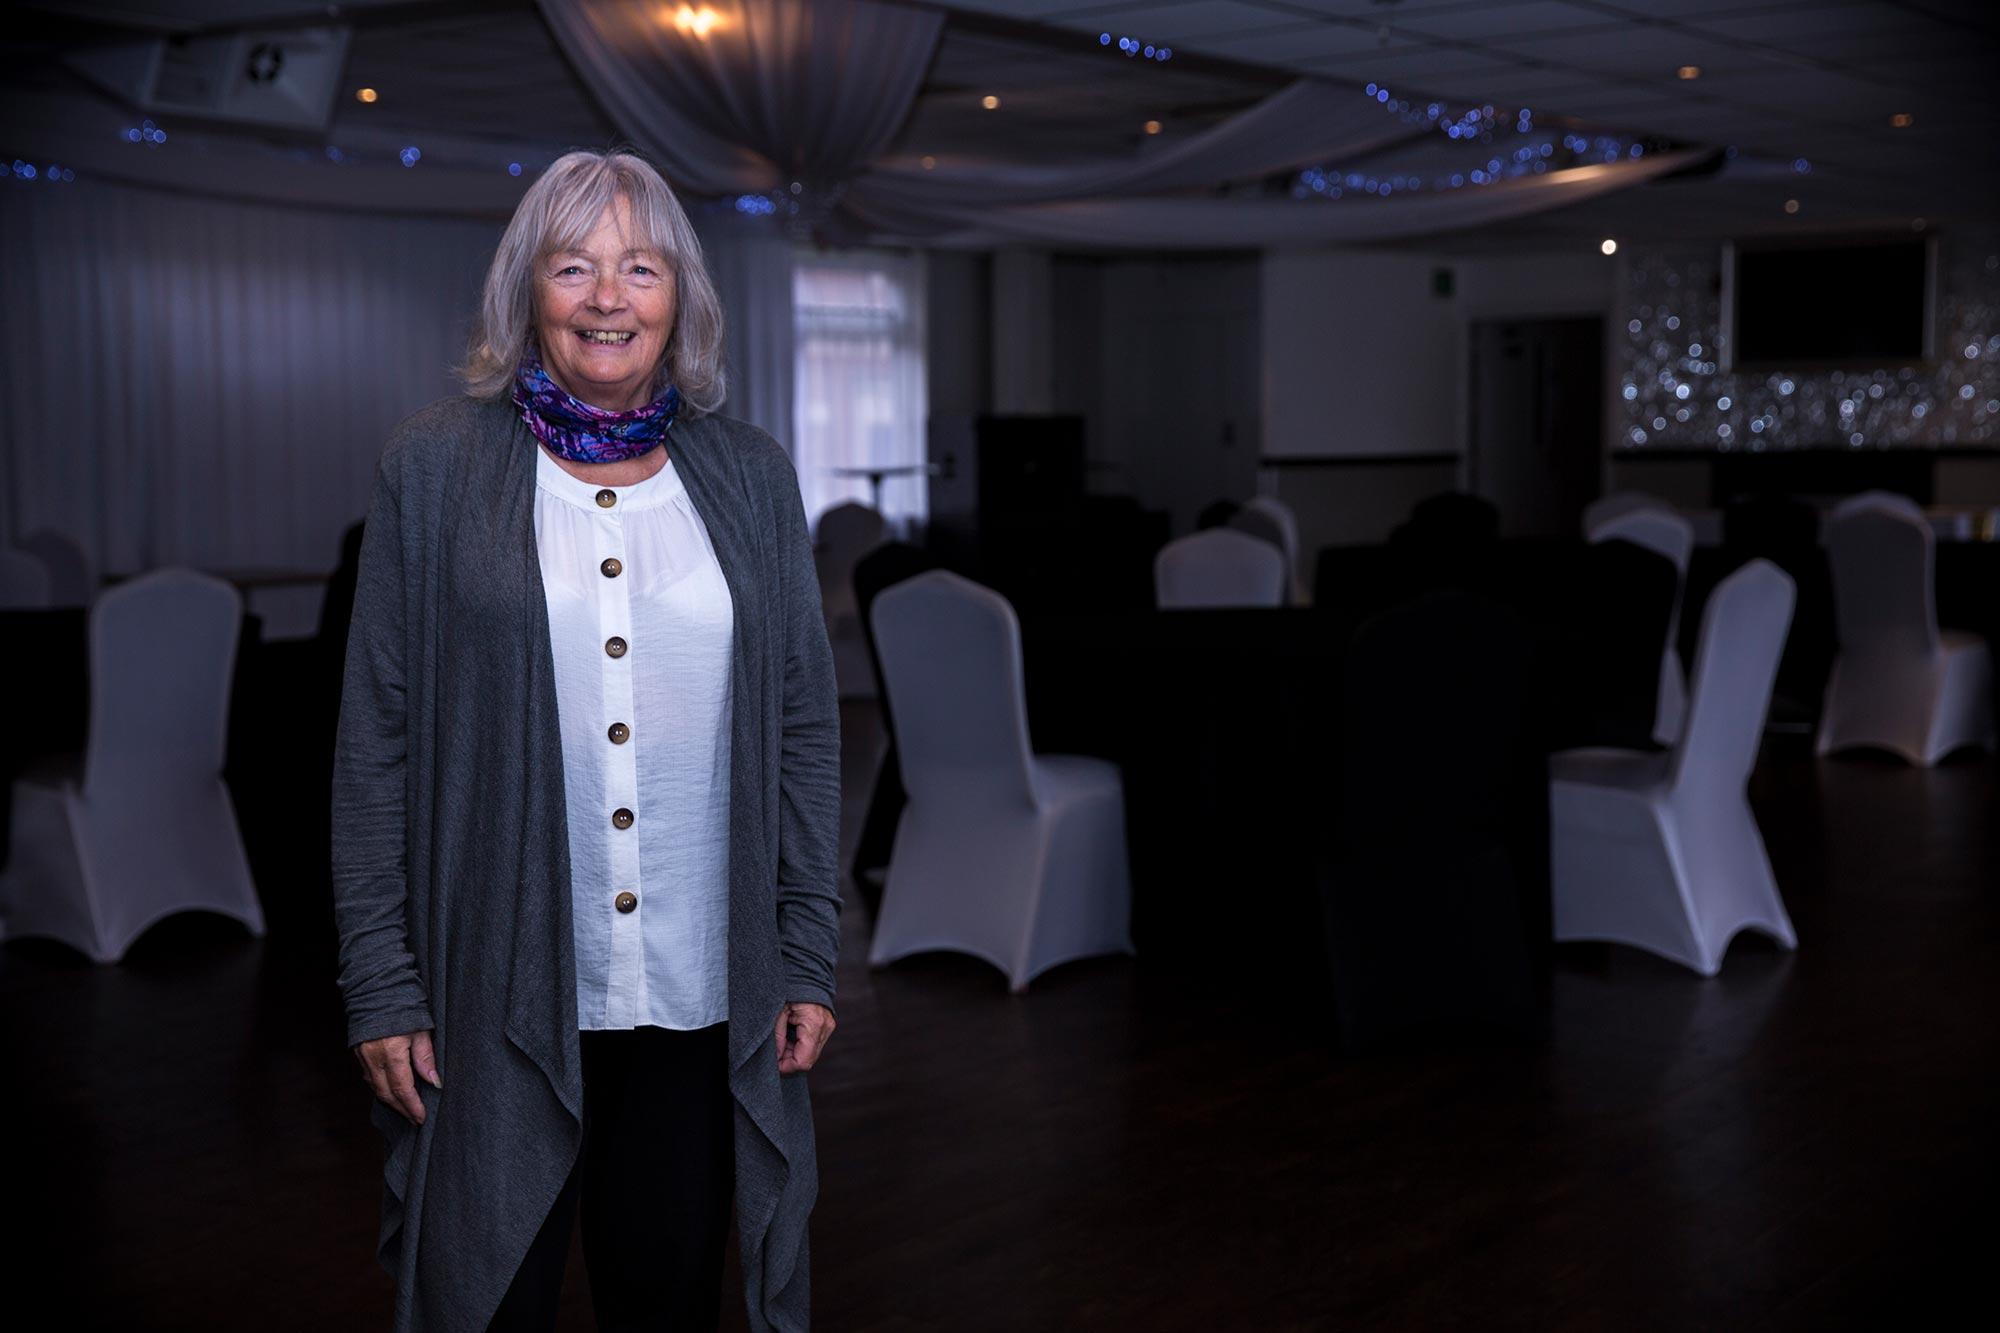 Marian Phillips setting up a wedding event